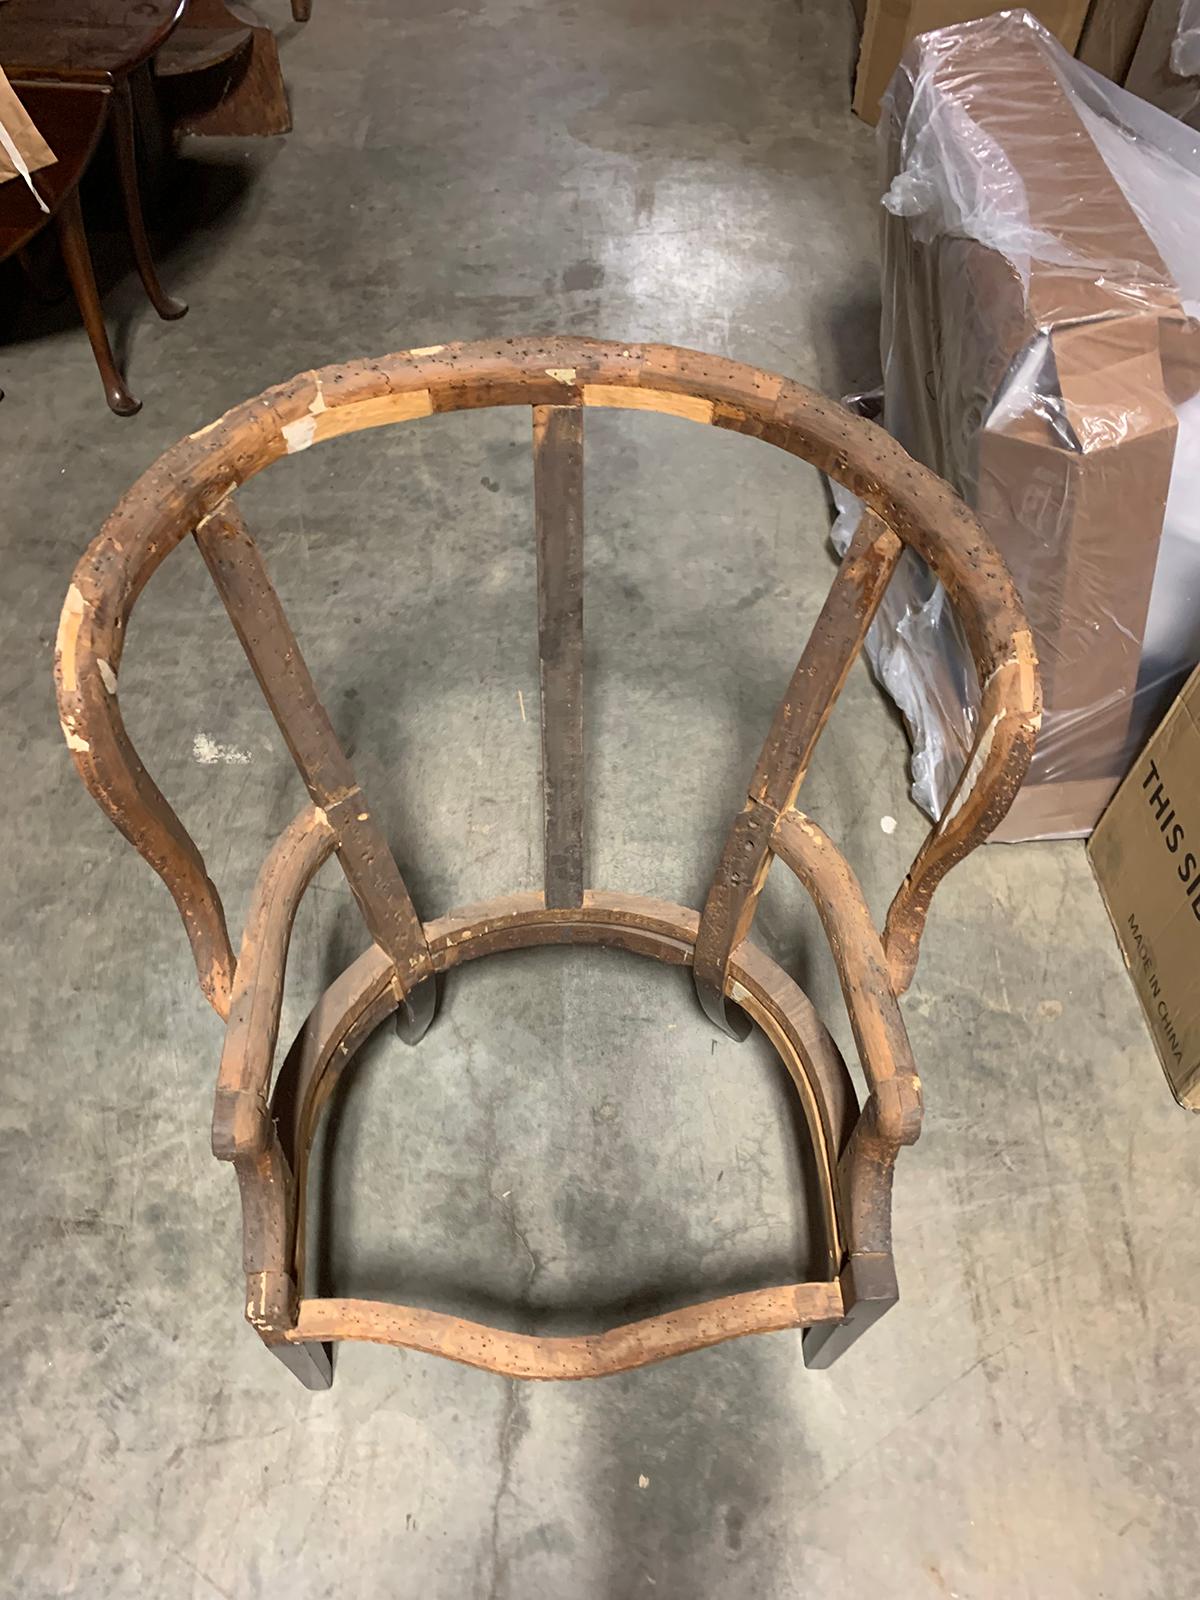 Large Scale 18th-19th Century English Barrel Wingback Chair Frame For Sale 8